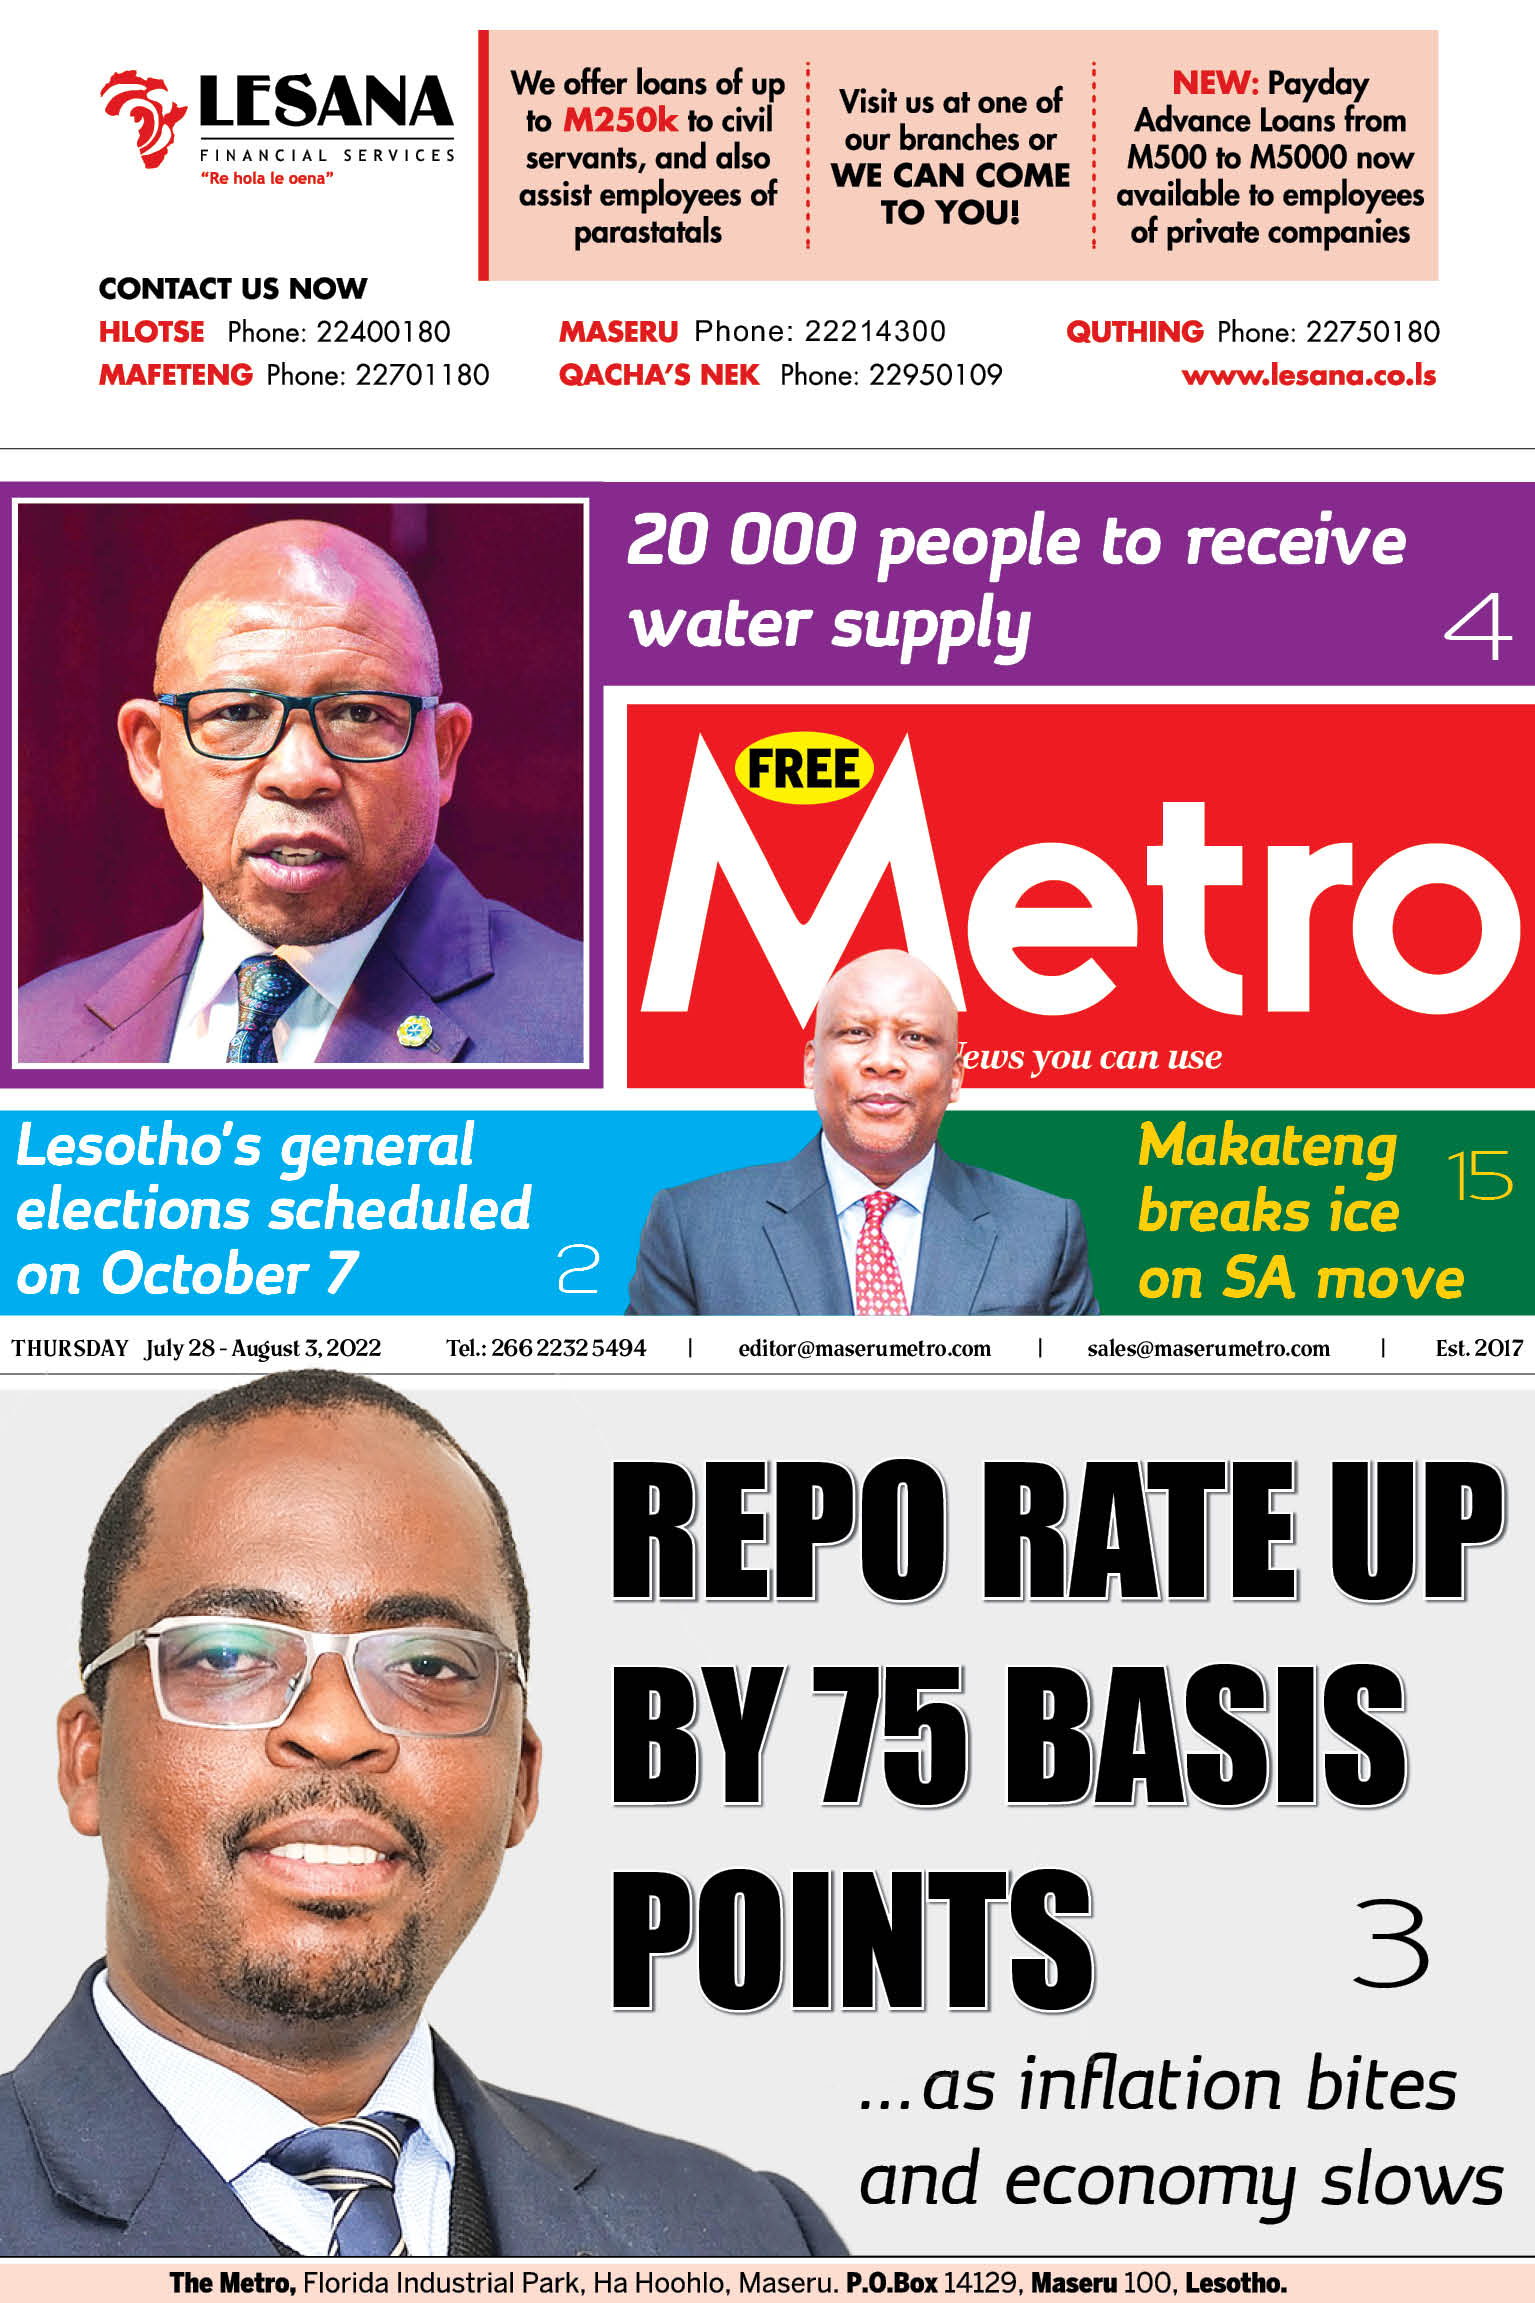 REPO RATE UP BY 75 BASIS POINTS